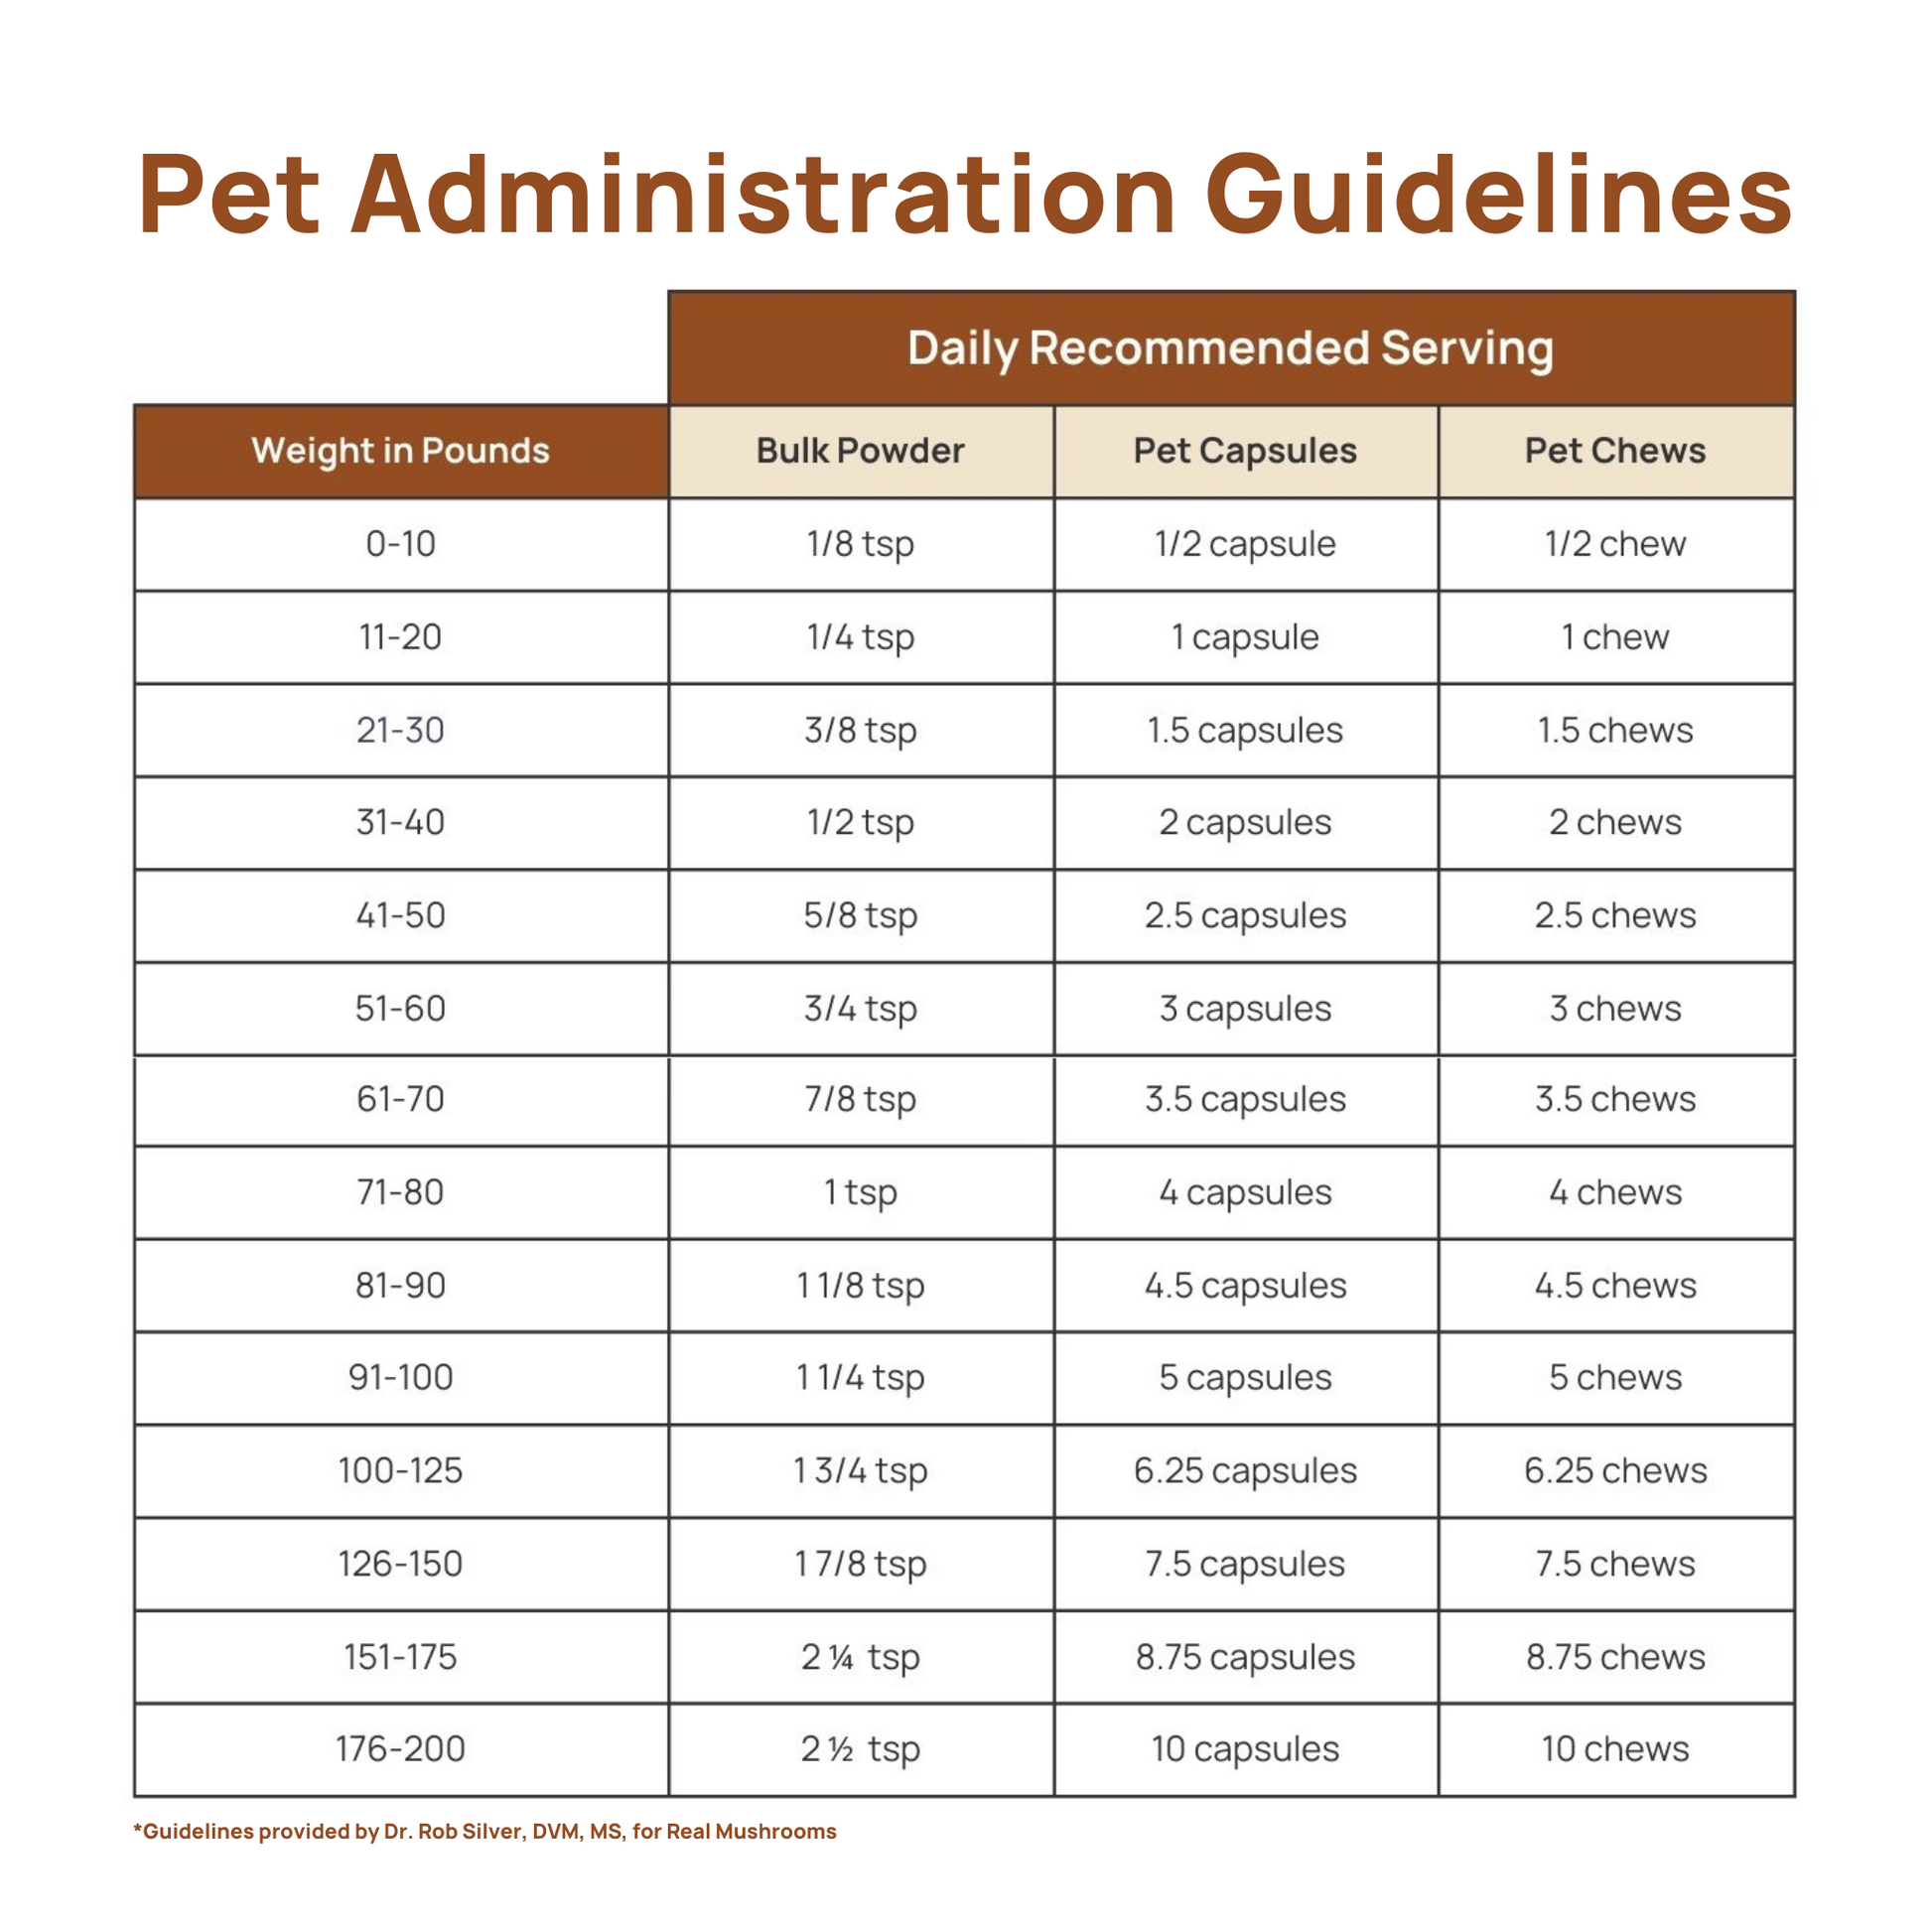 Organic pet administration guidelines for Real Mushrooms' Organic Chaga Extract Powder for Pets.